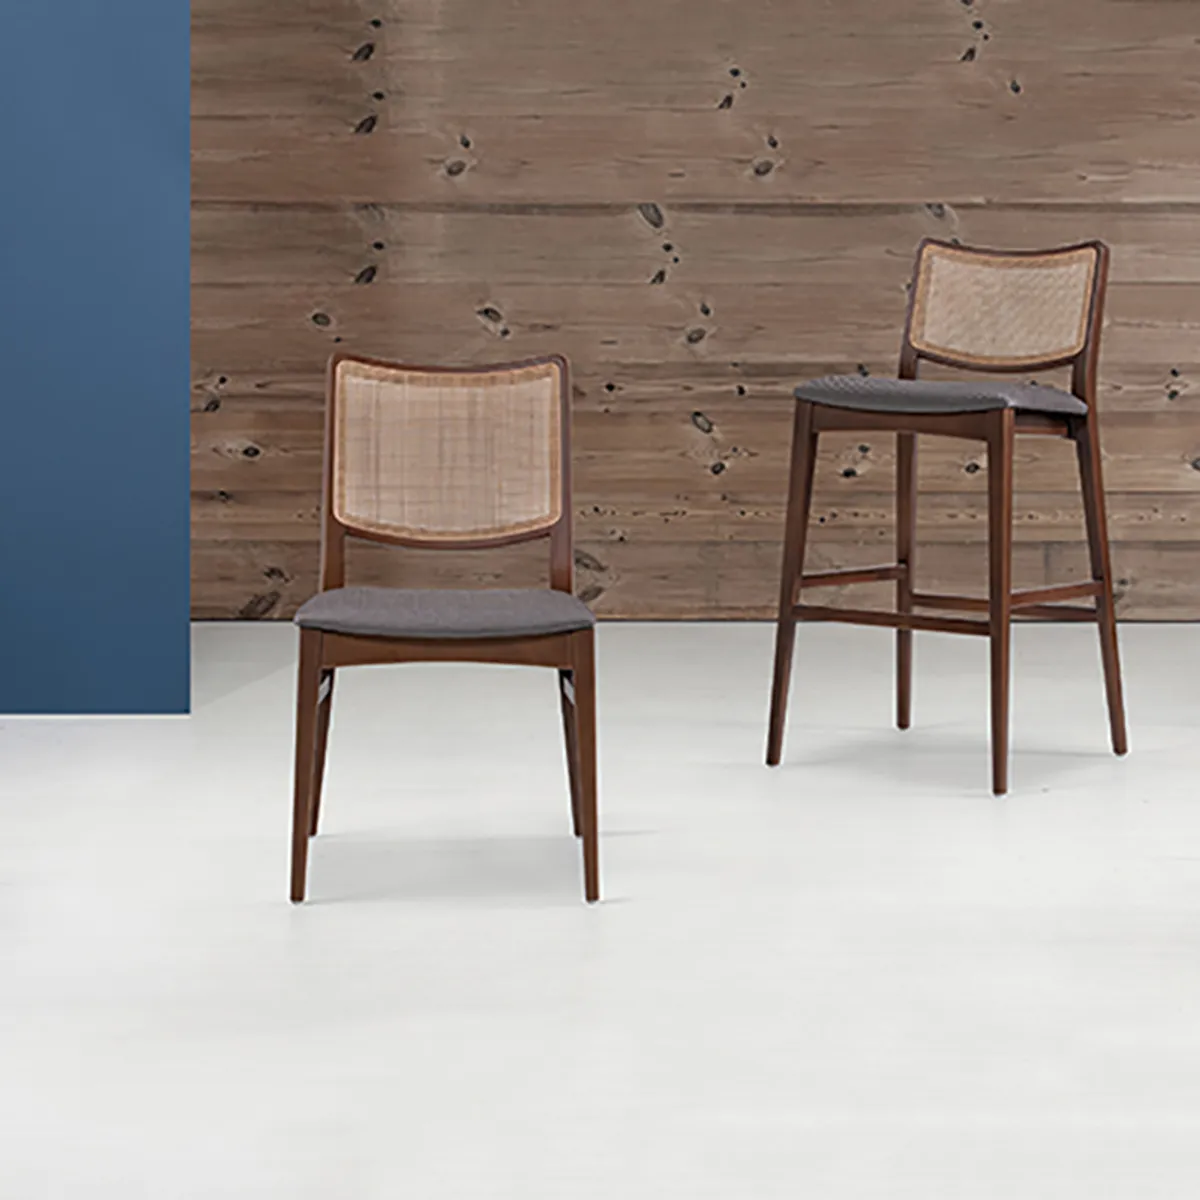 Spirit Bar Stool And Chair Together